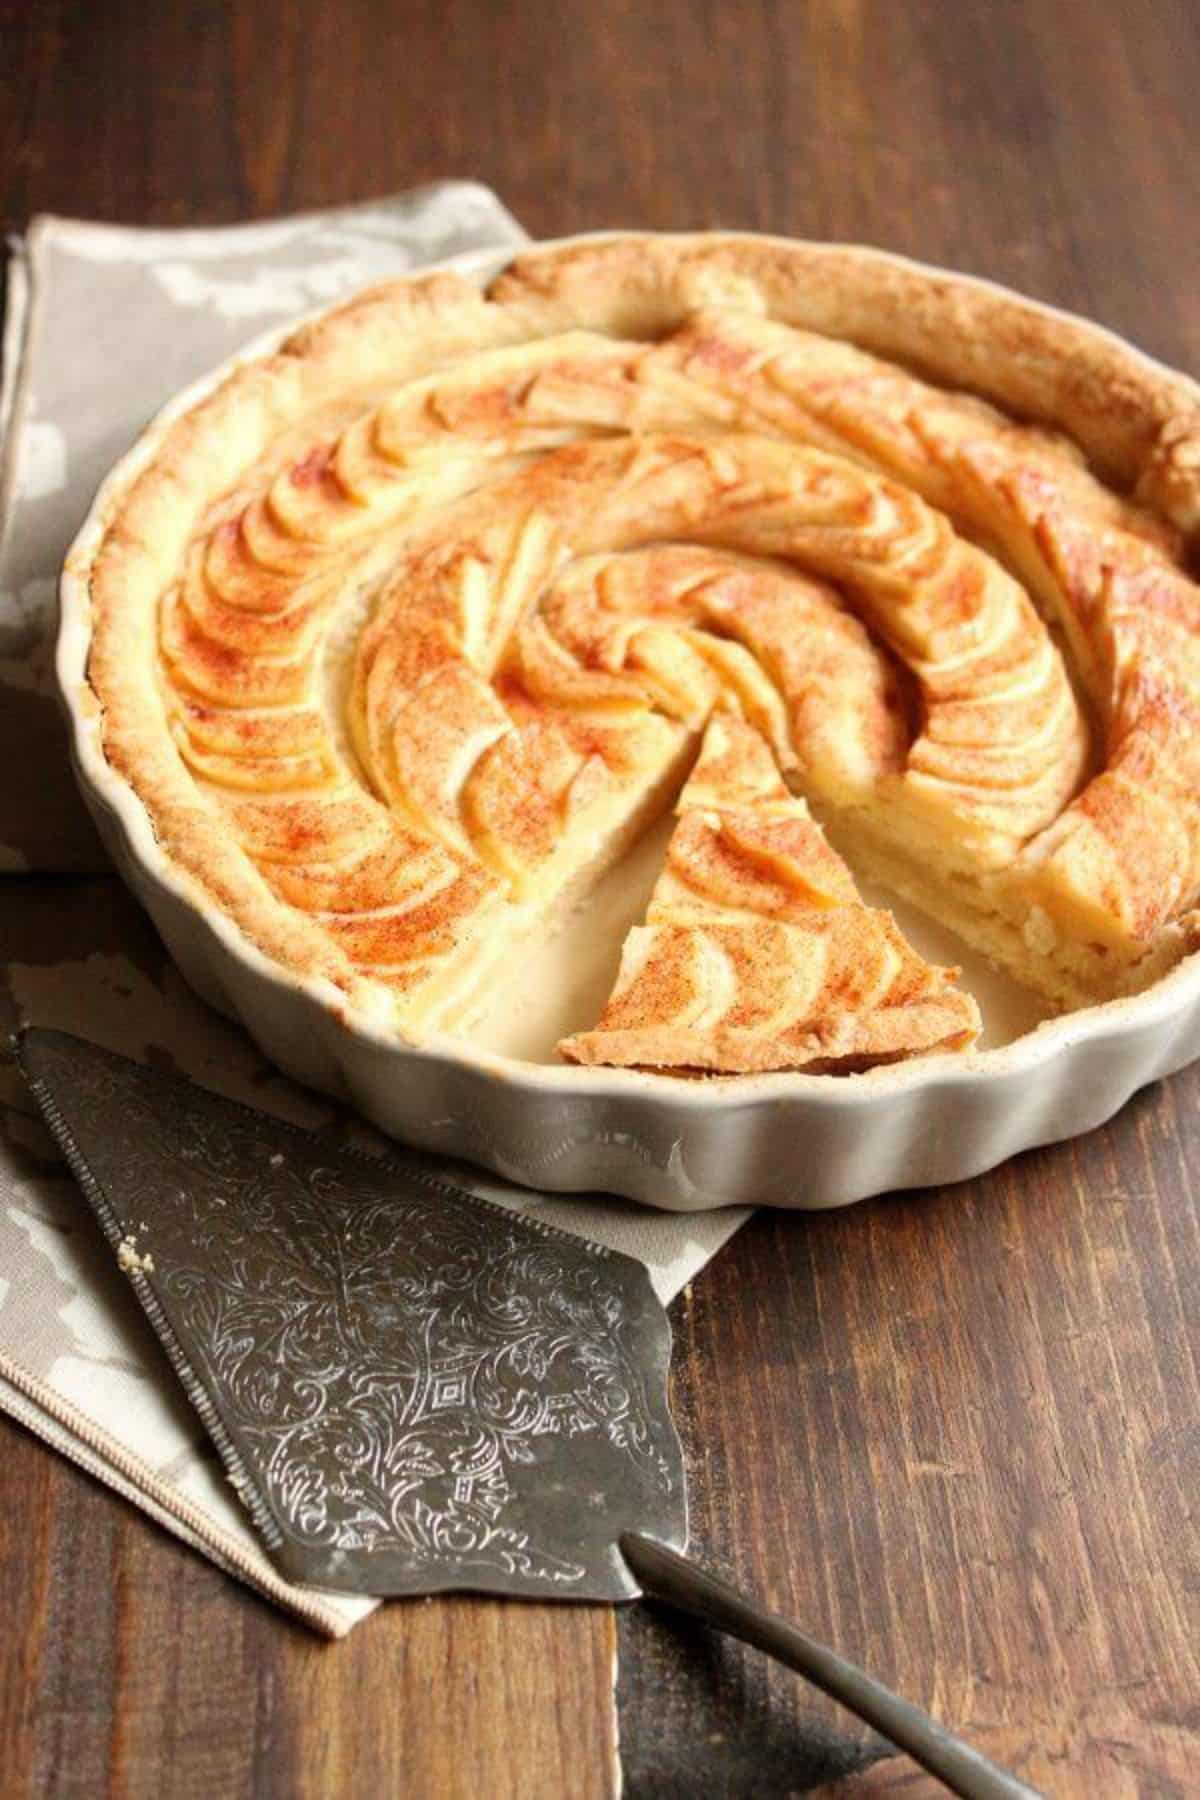 Apple tart with almond paste filling in a casserole.